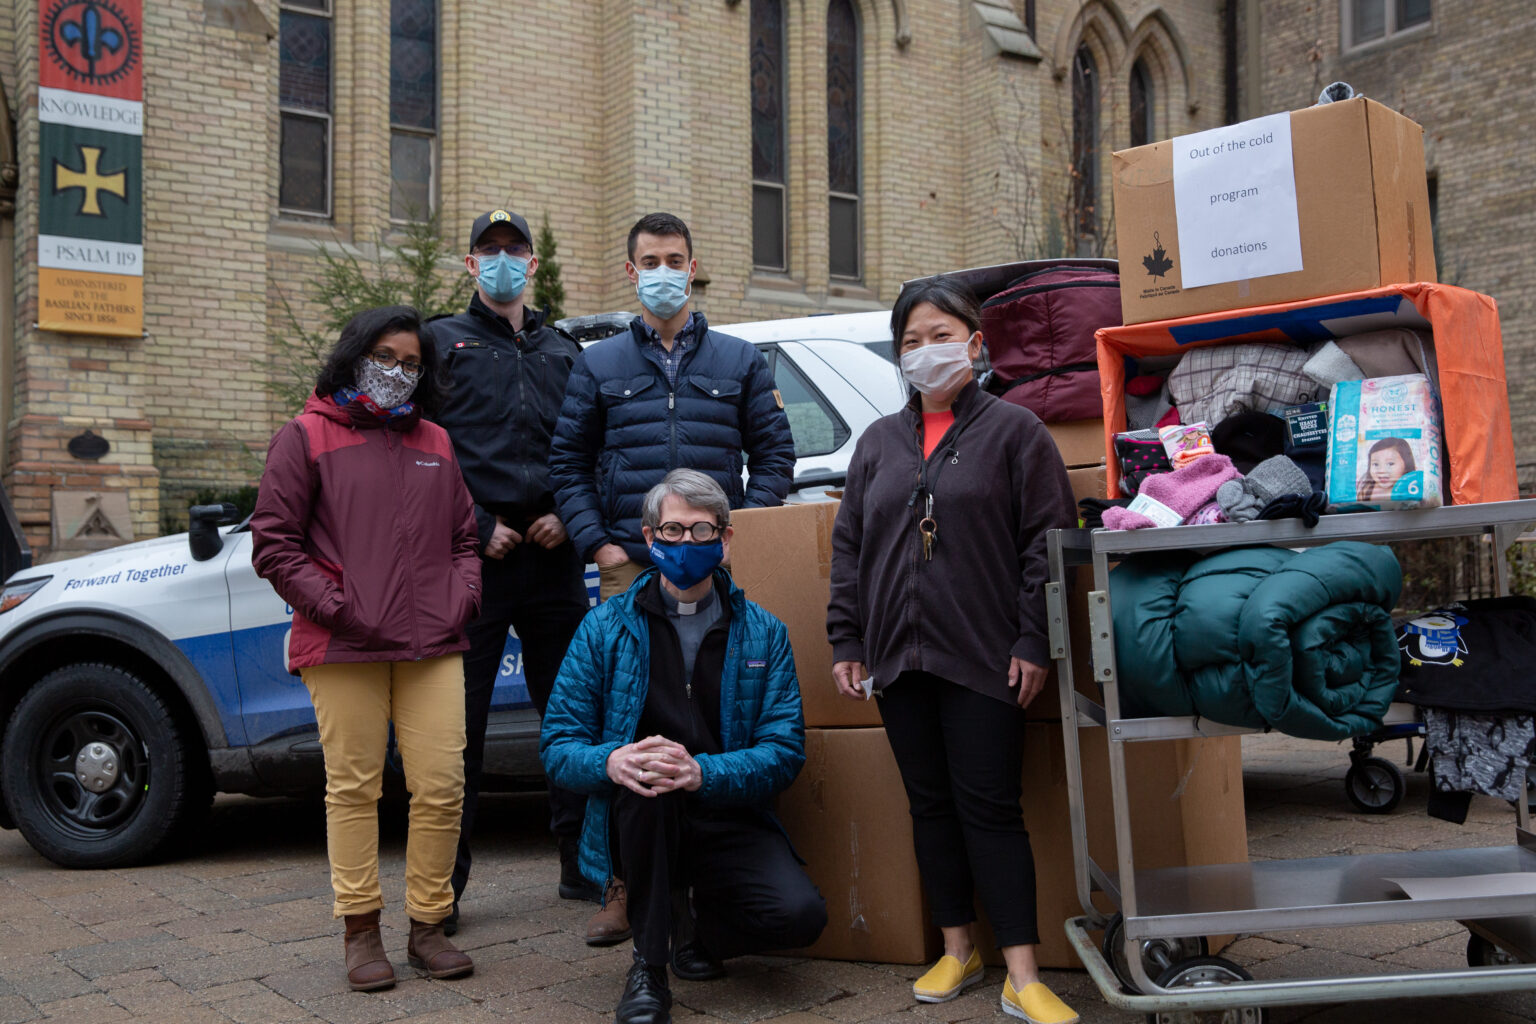 A group of students pose outside St. Basil's on a cold day with Fr. Morgan Rice. Everyone is wearing medical masks and winter coats. They are surrounded by boxes of donations.